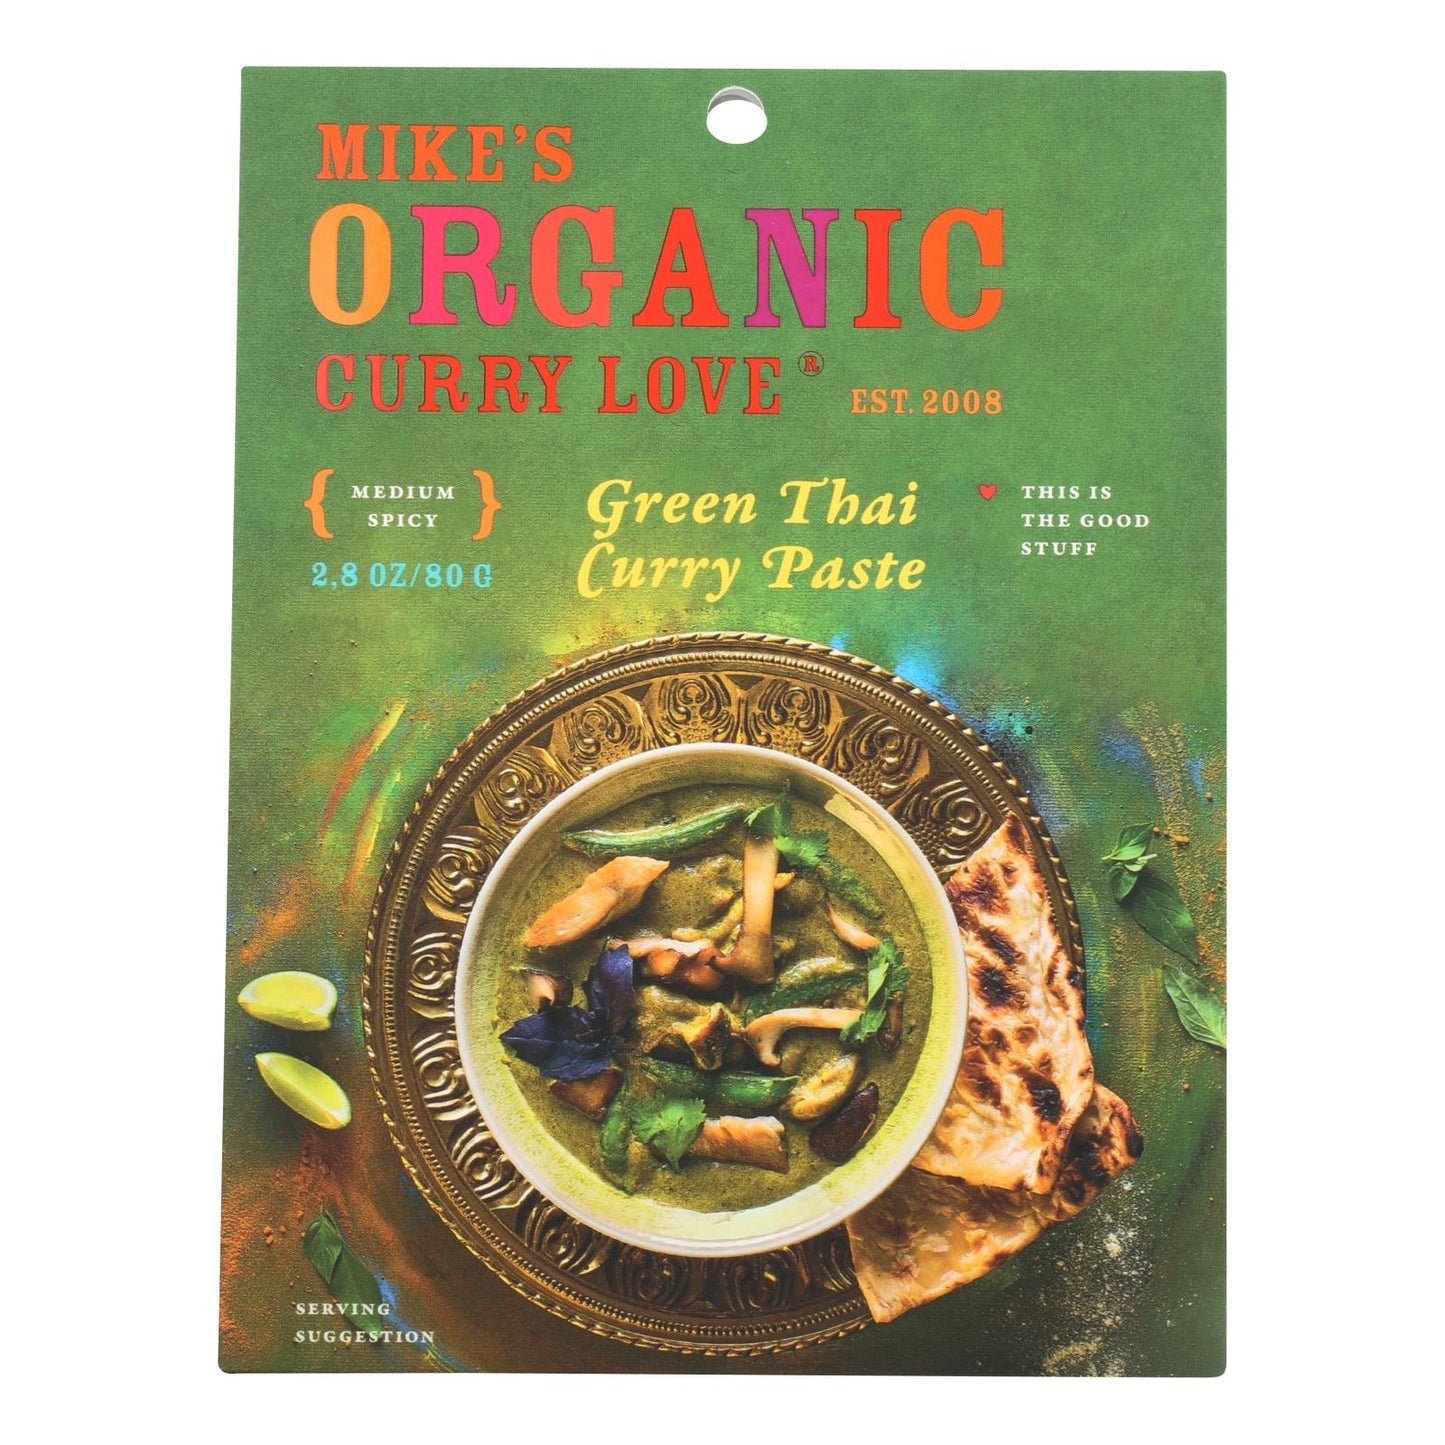 Mike's Organic Curry Love - Organic Curry Paste - Green Thai - Case Of 6 - 2.8 Oz.